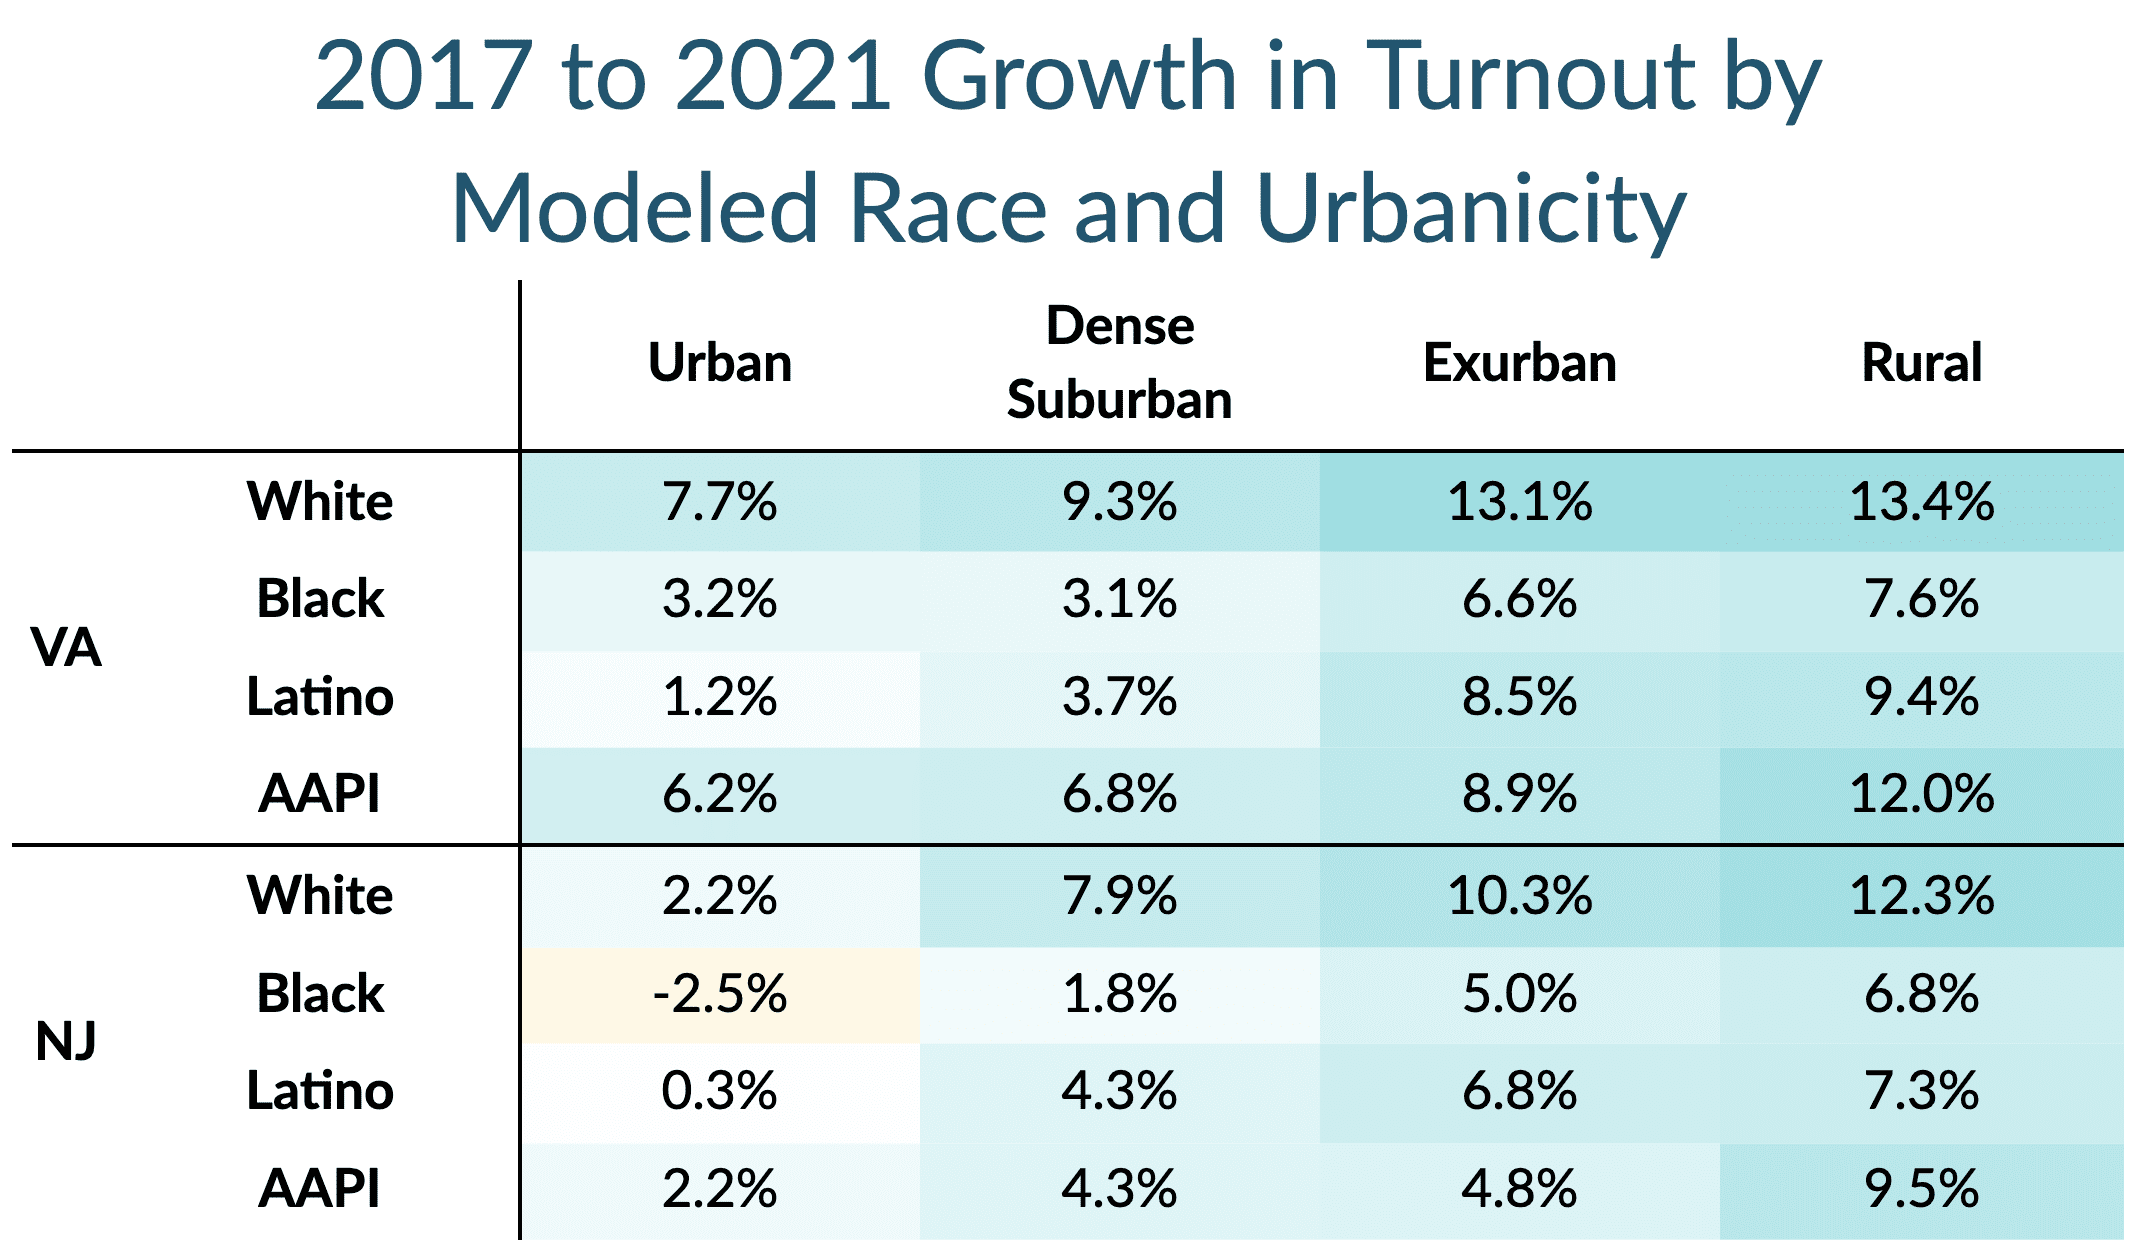 Table of 2017 to 2021 Growth in Turnout by 
Modeled Race and Urbanicity